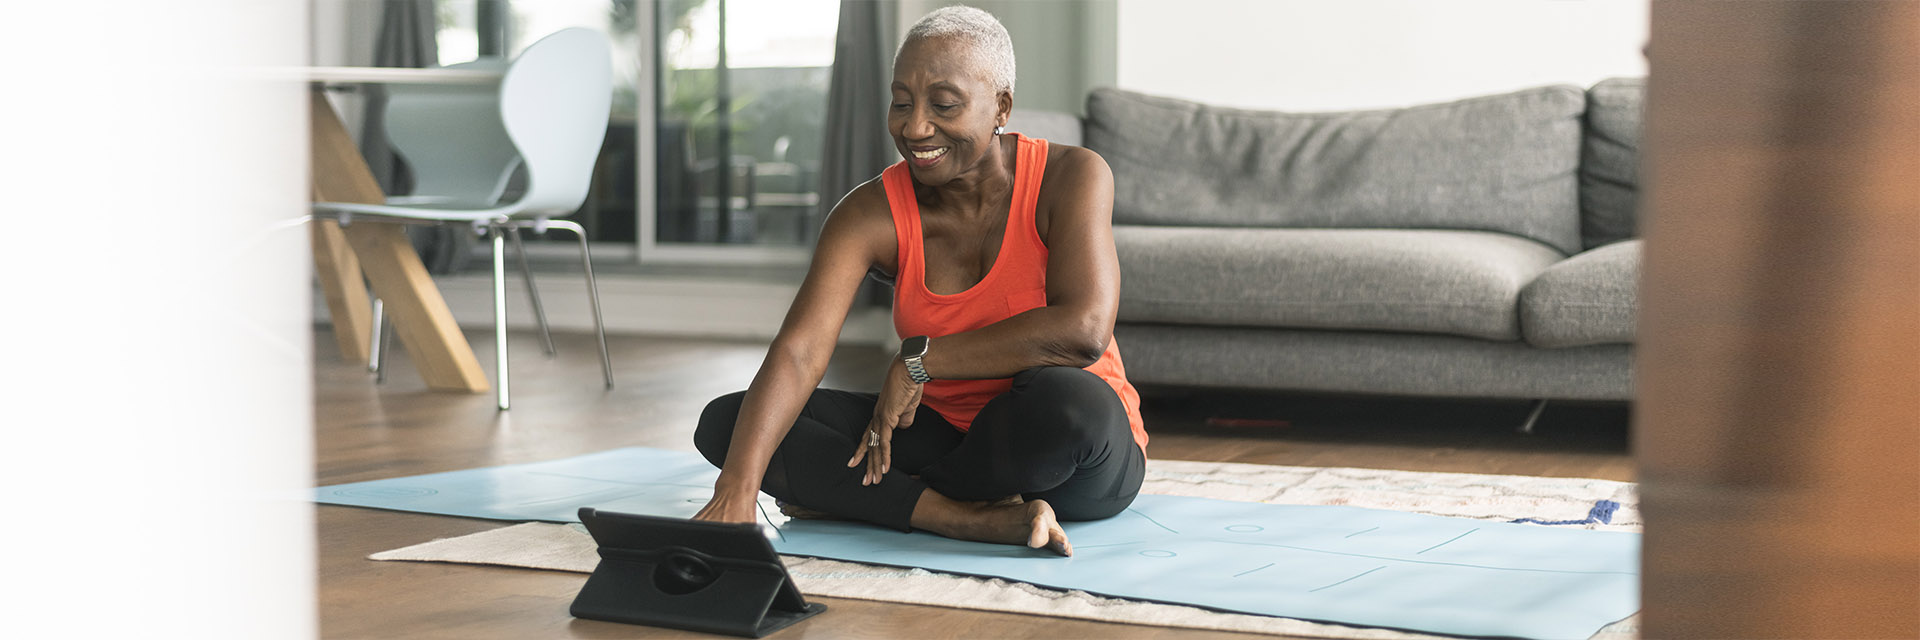 Mature woman sitting on a yoga mat looking at her tablet